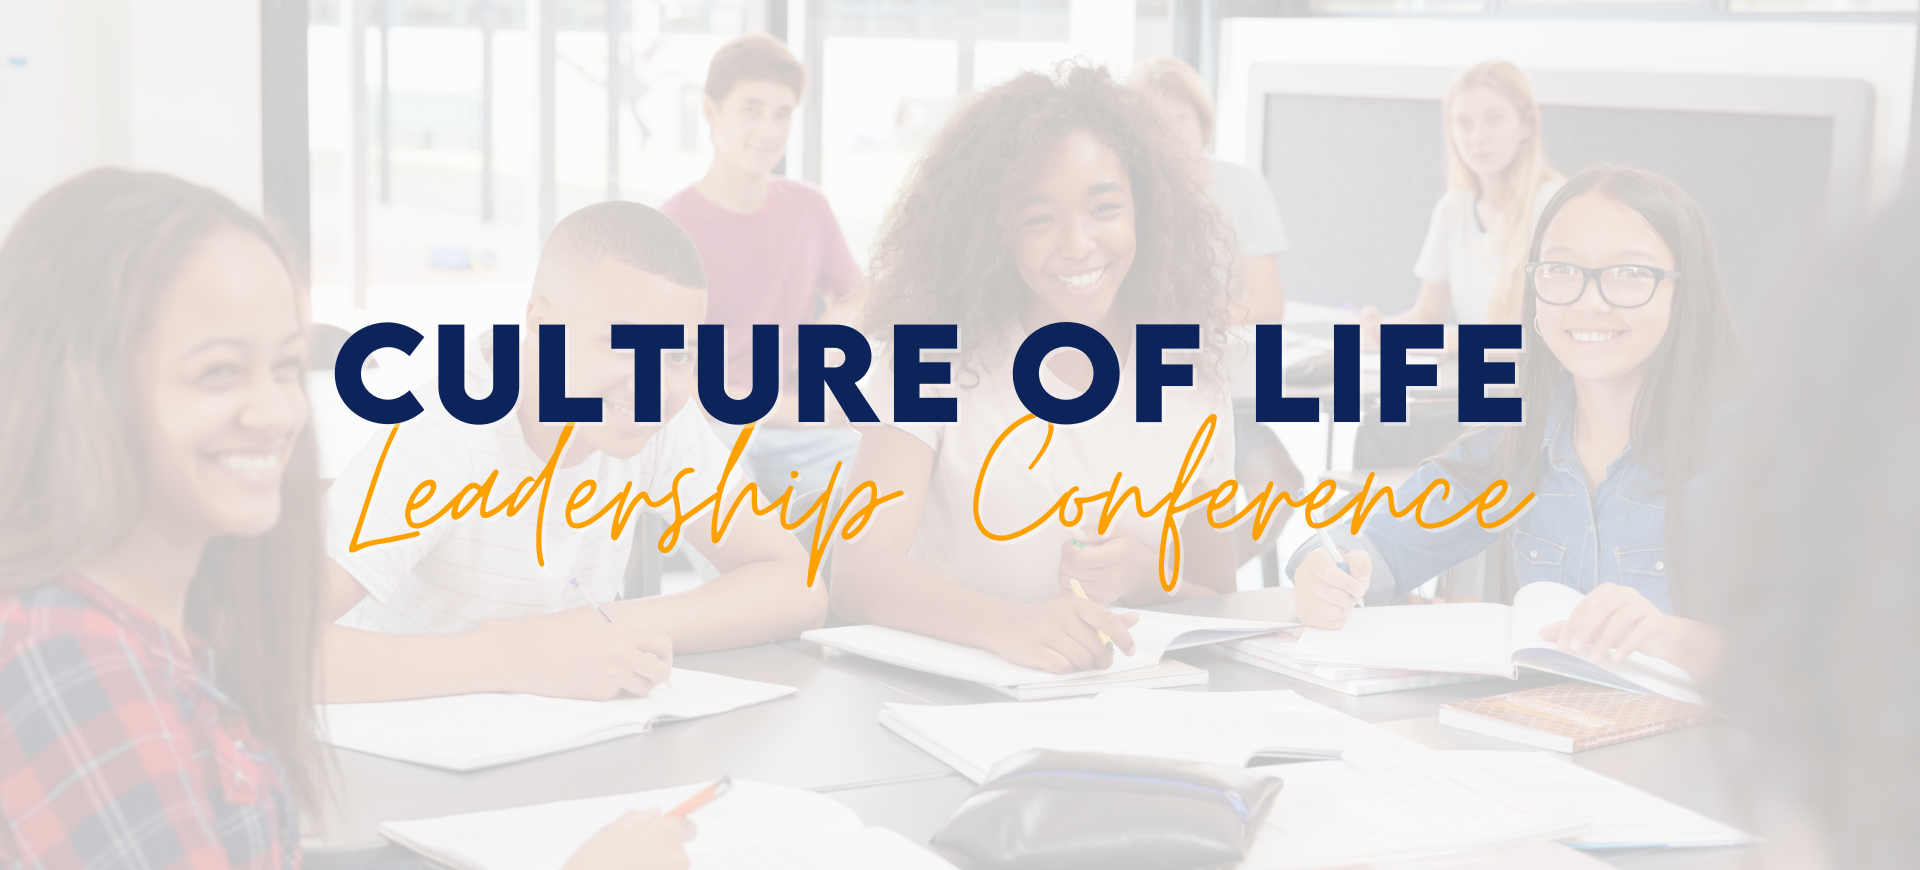 Culture of Life Leadership Conference